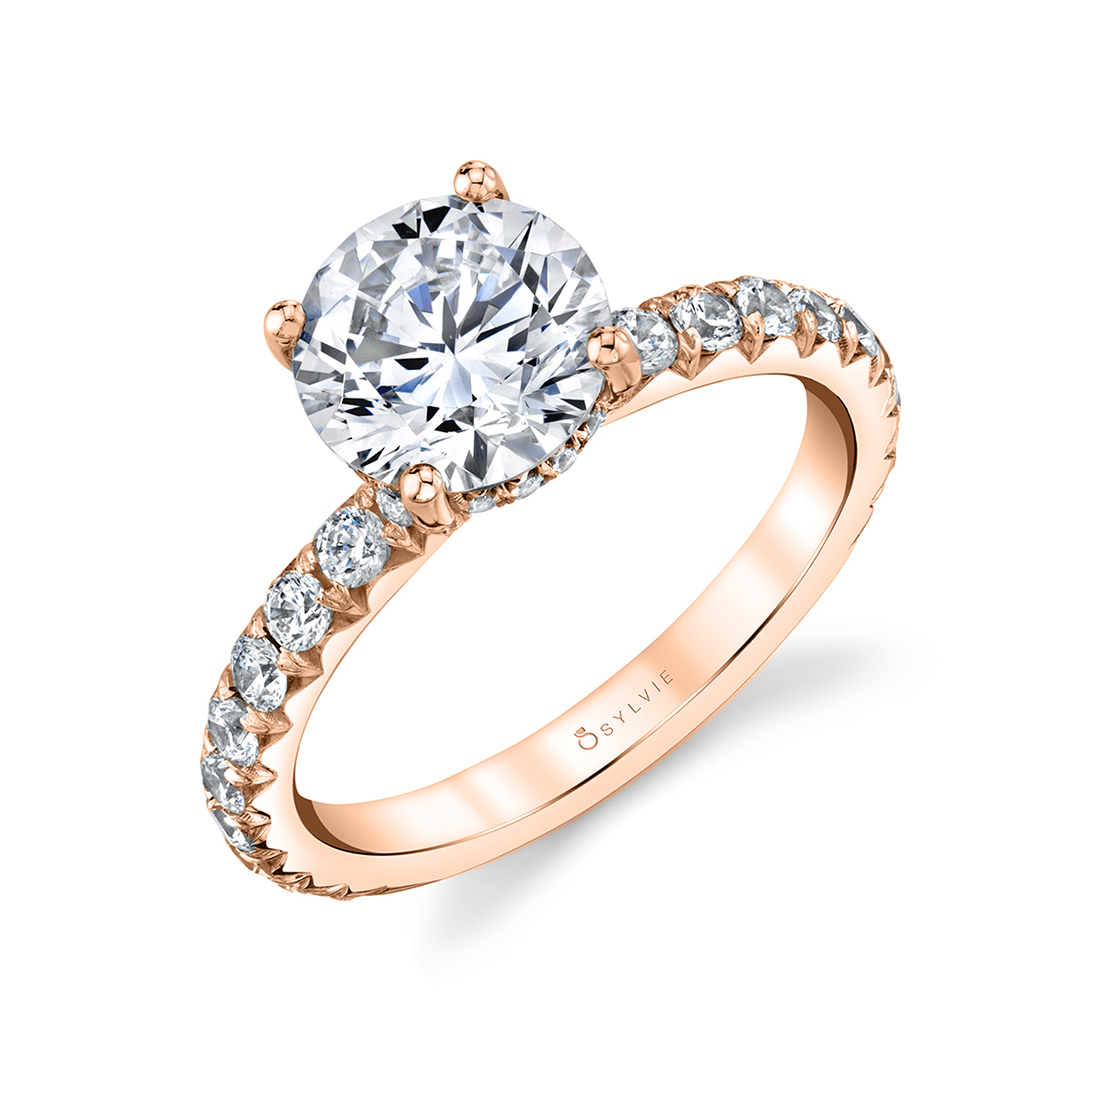 Wide band engagement ring - Malencia